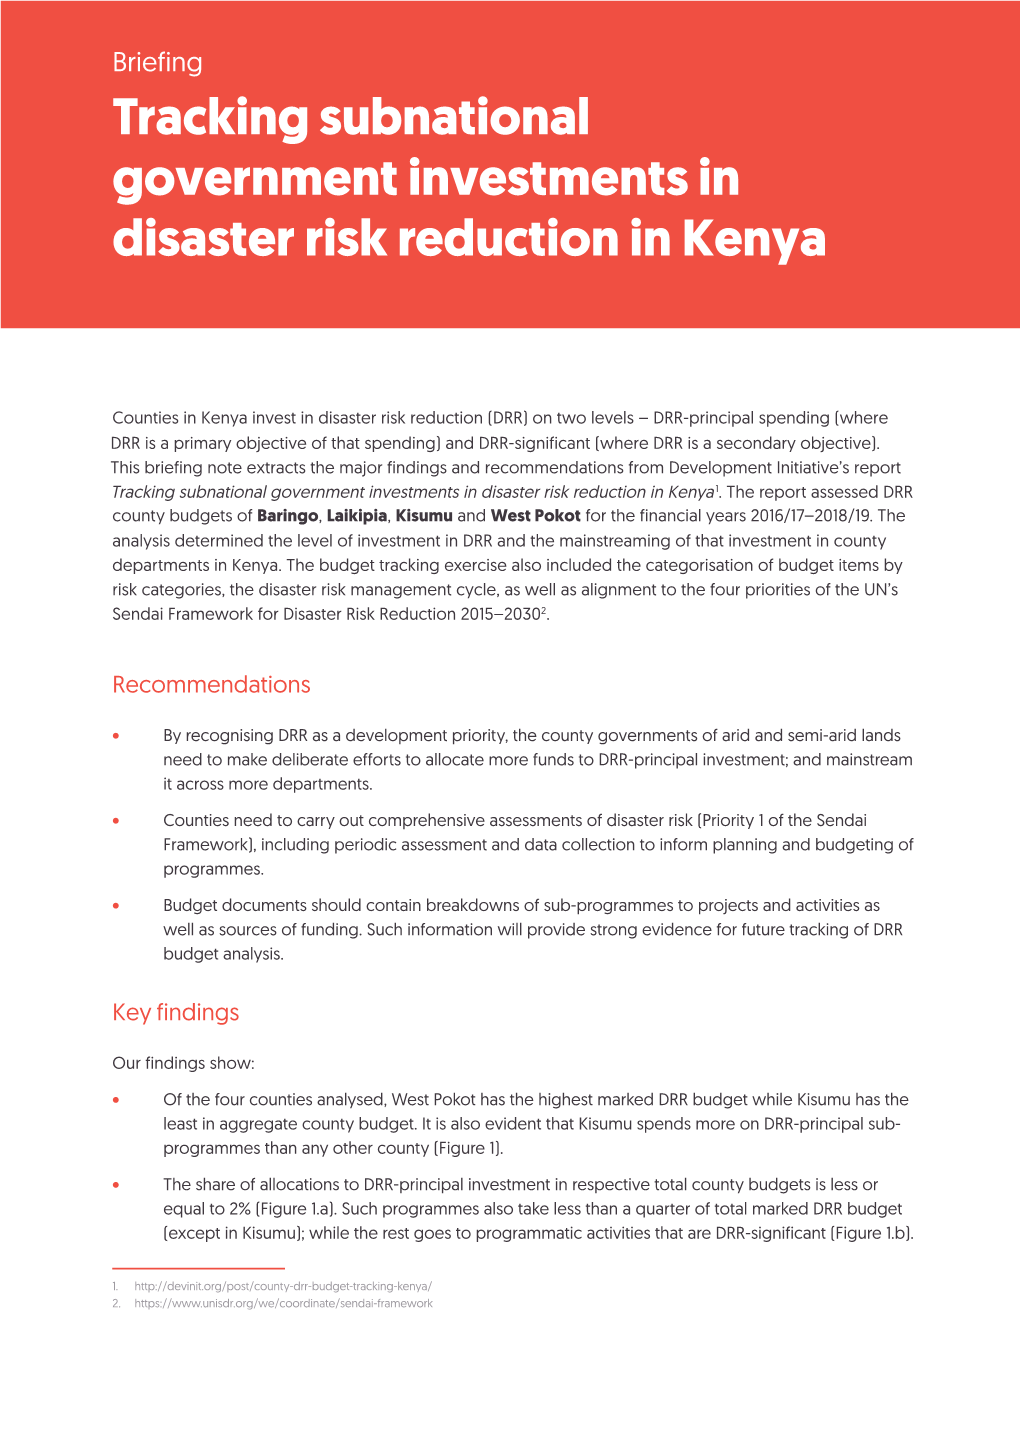 Tracking Subnational Government Investments in Disaster Risk Reduction in Kenya